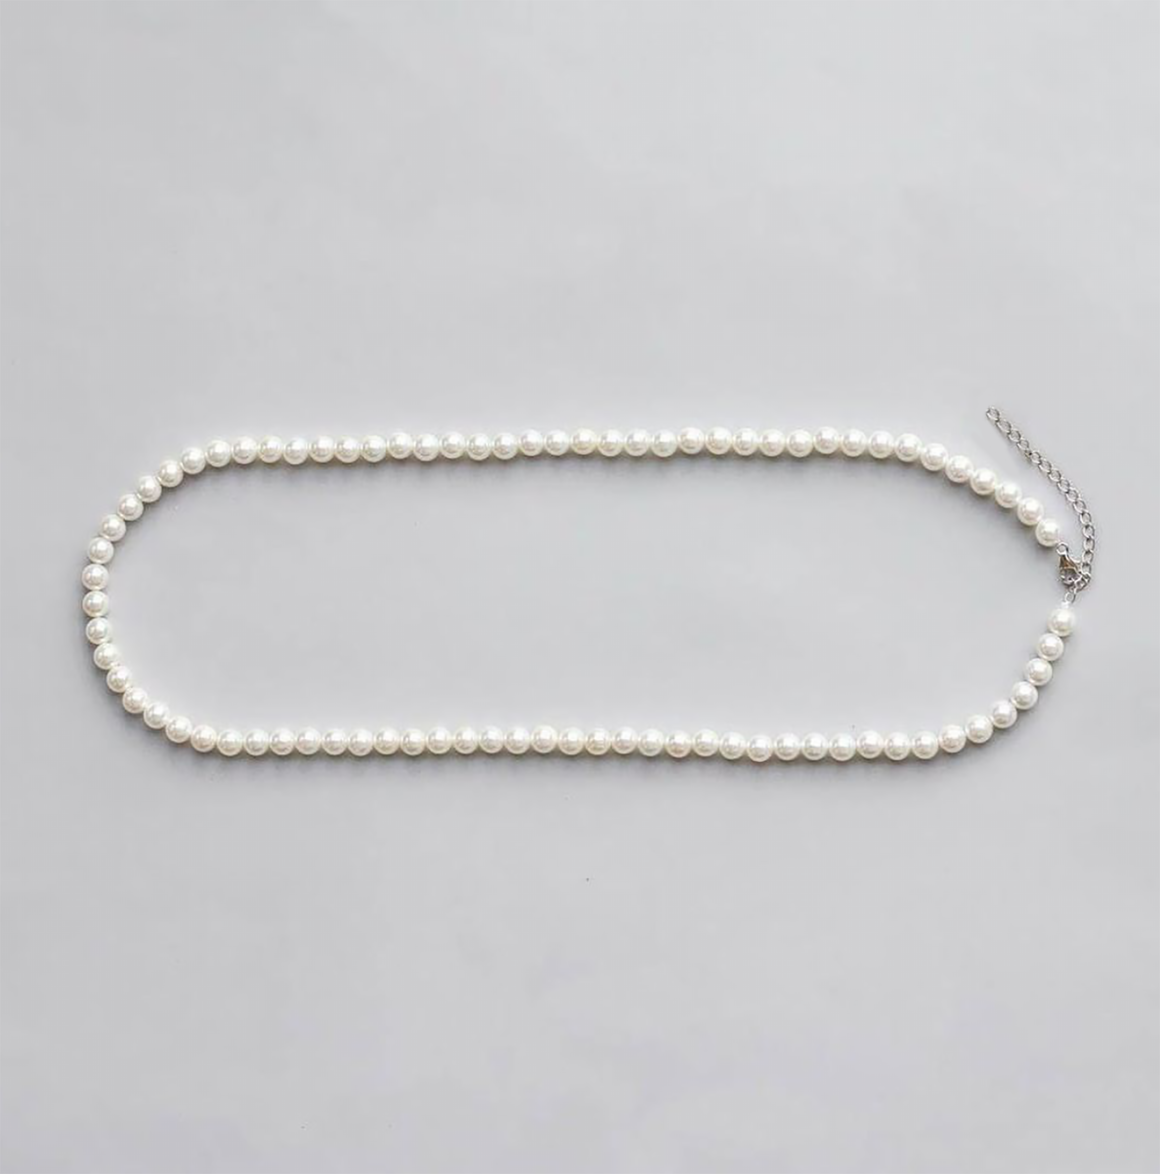 54 FLORAL 8mm PEARL NECKLACE BEAD NECKLACE CHAIN - CREAM